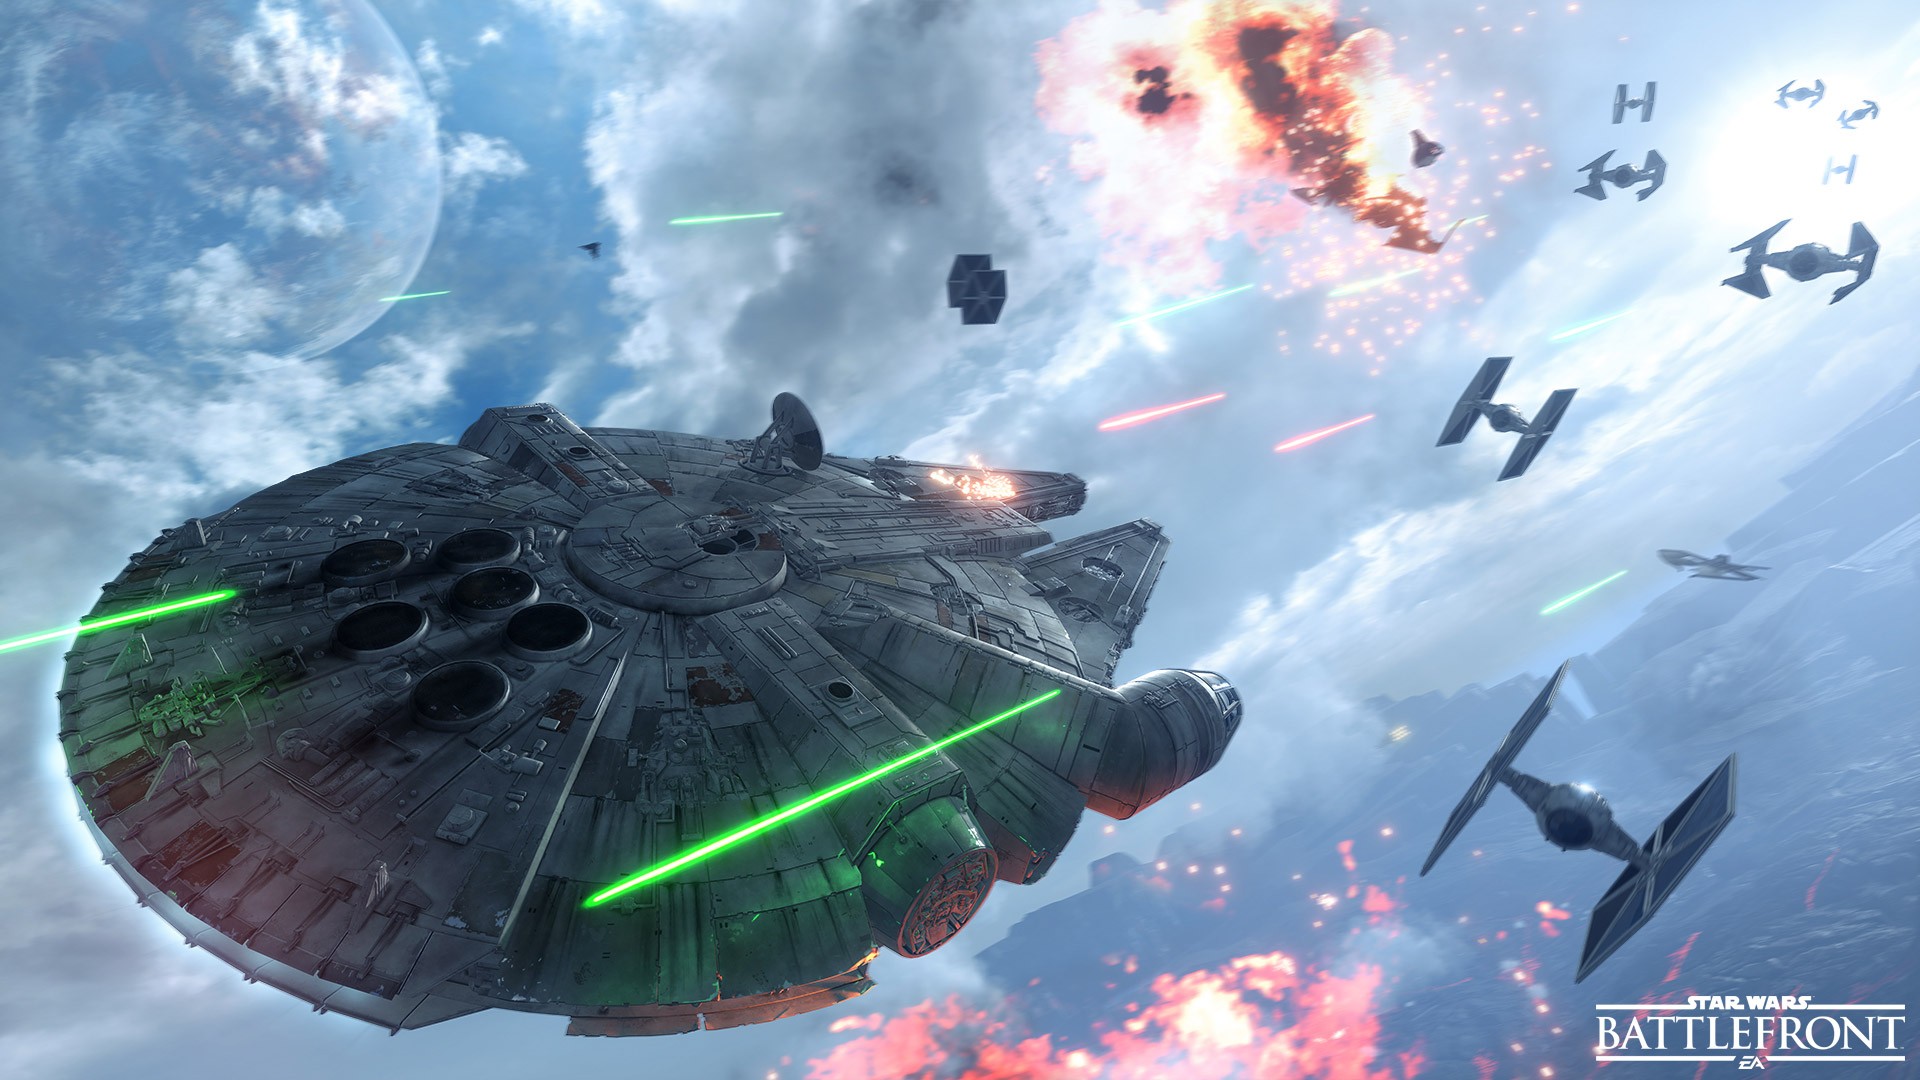 Wallpaper, video games, Earth, TIE Fighter, Millennium Falcon, Star Wars Battlefront, screenshot, computer wallpaper, atmosphere of earth, outer space 1920x1080